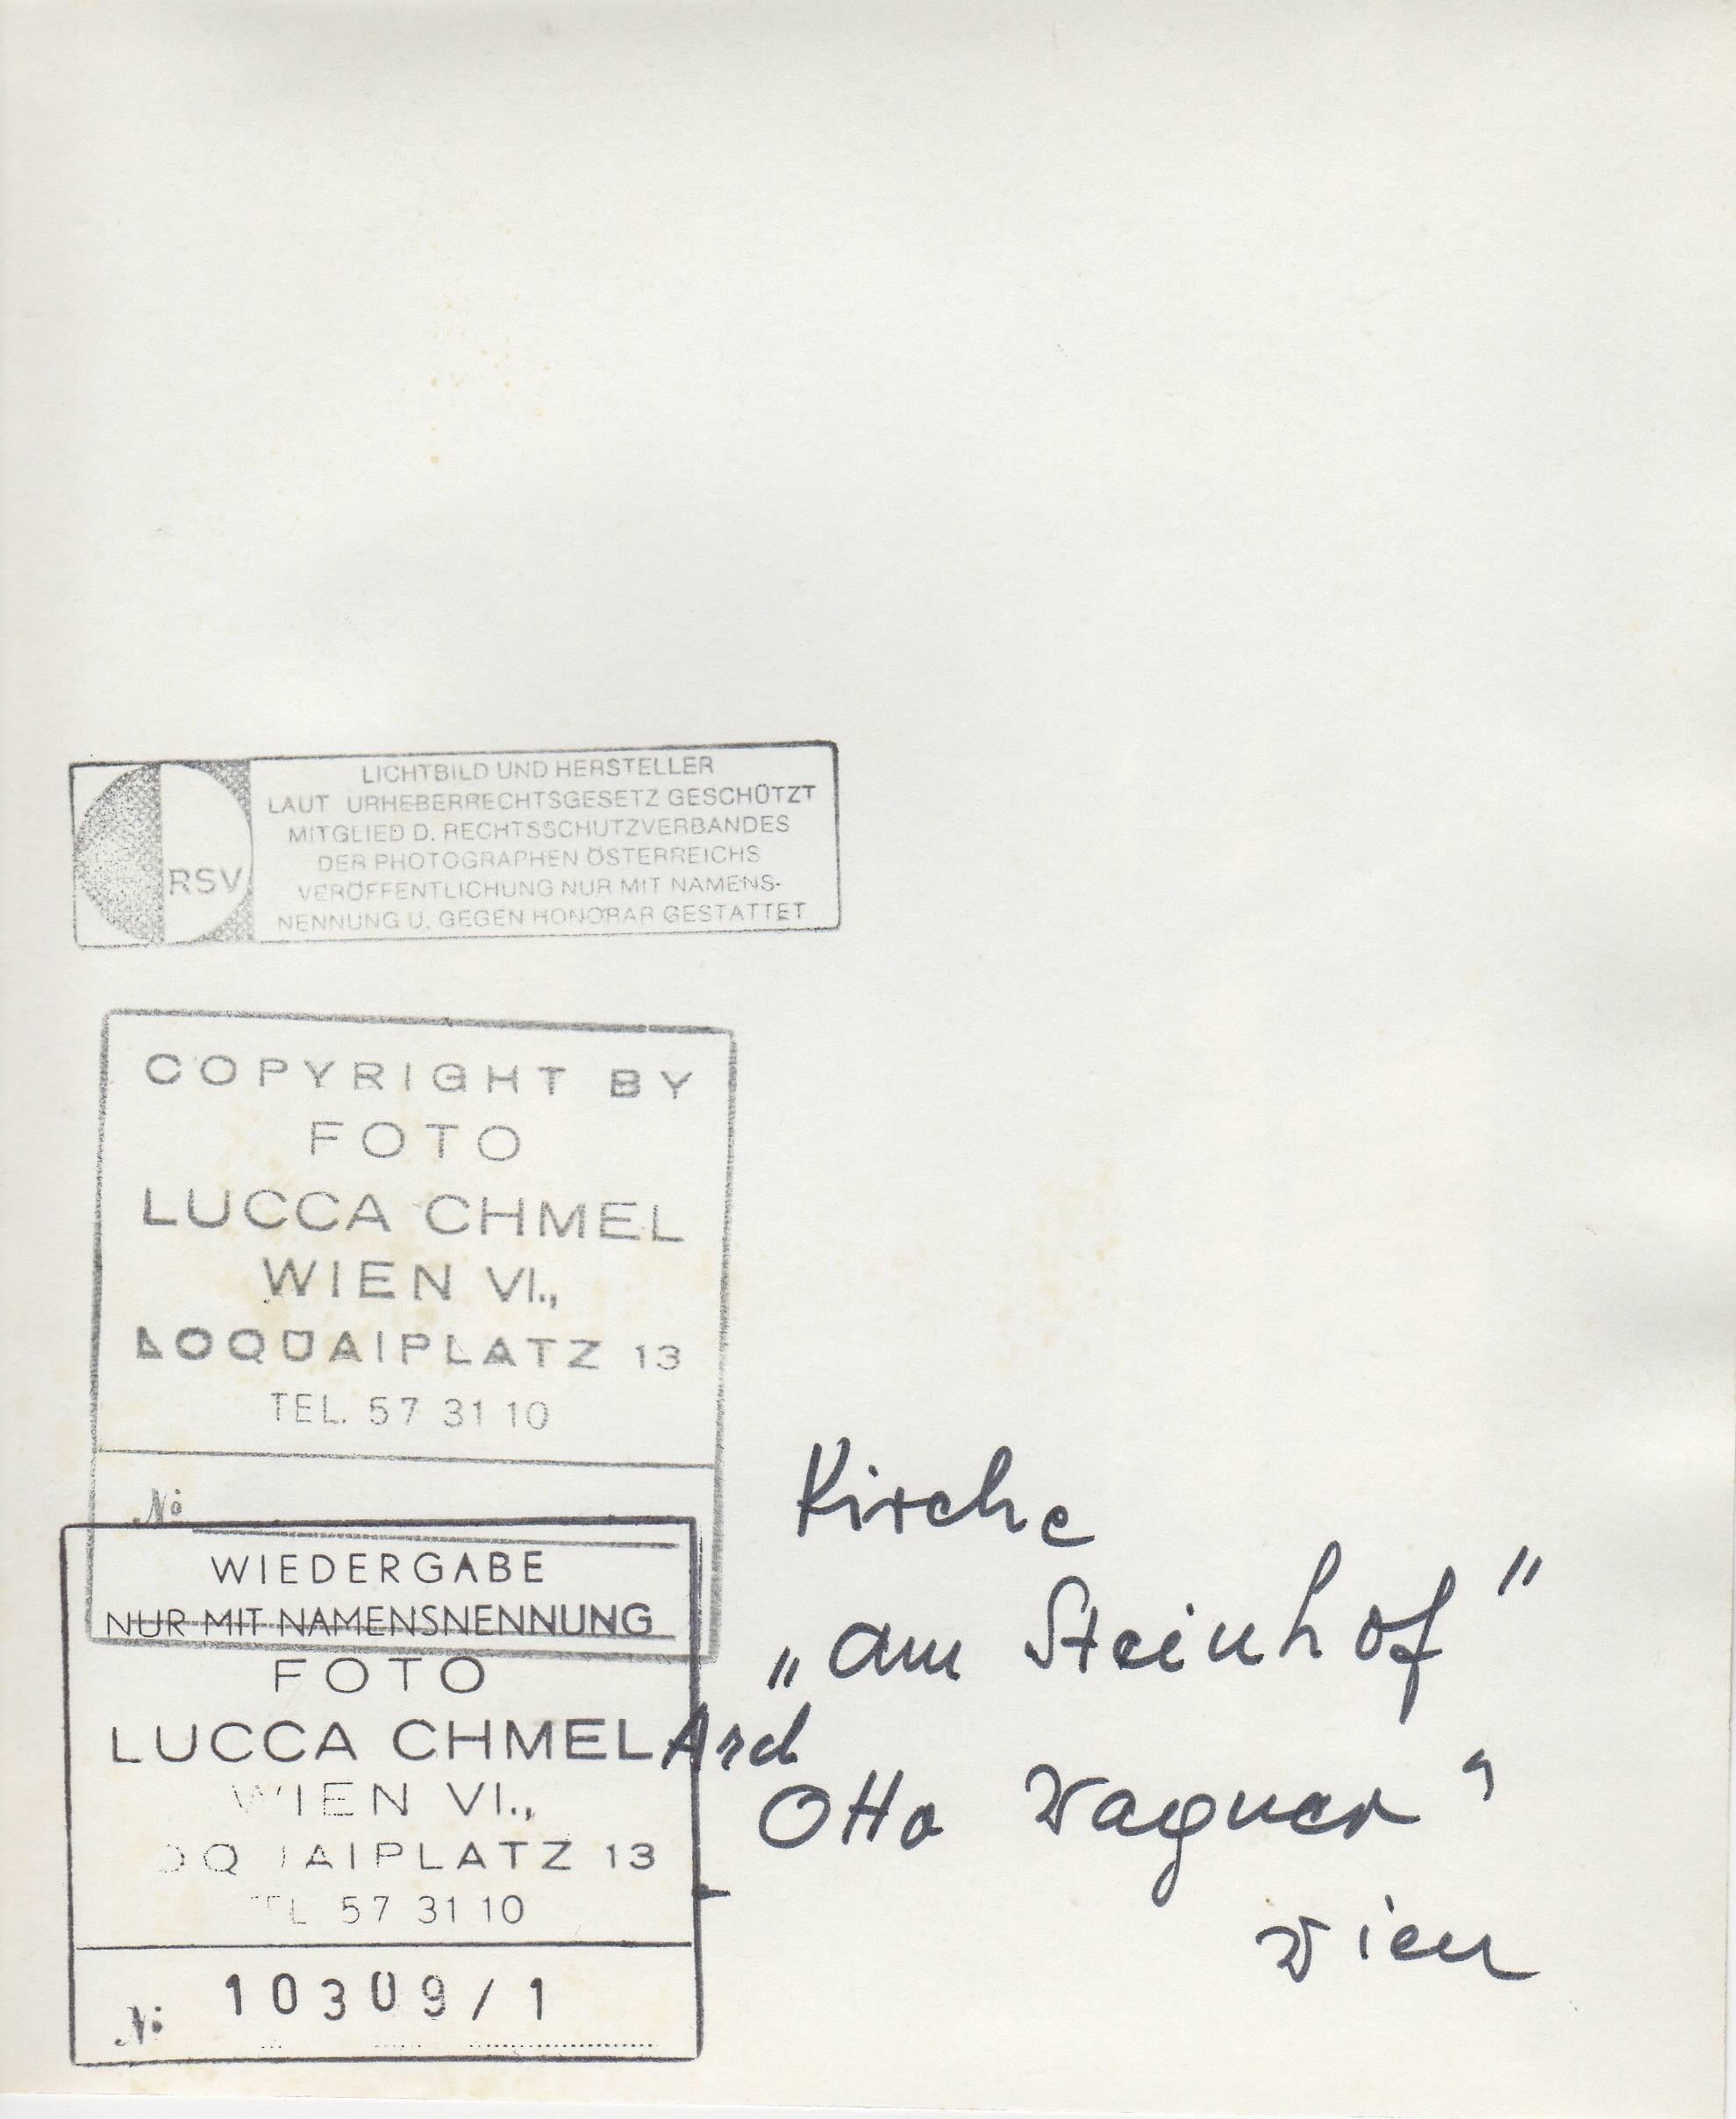 Lucca Chmel: The Otto Wagner 